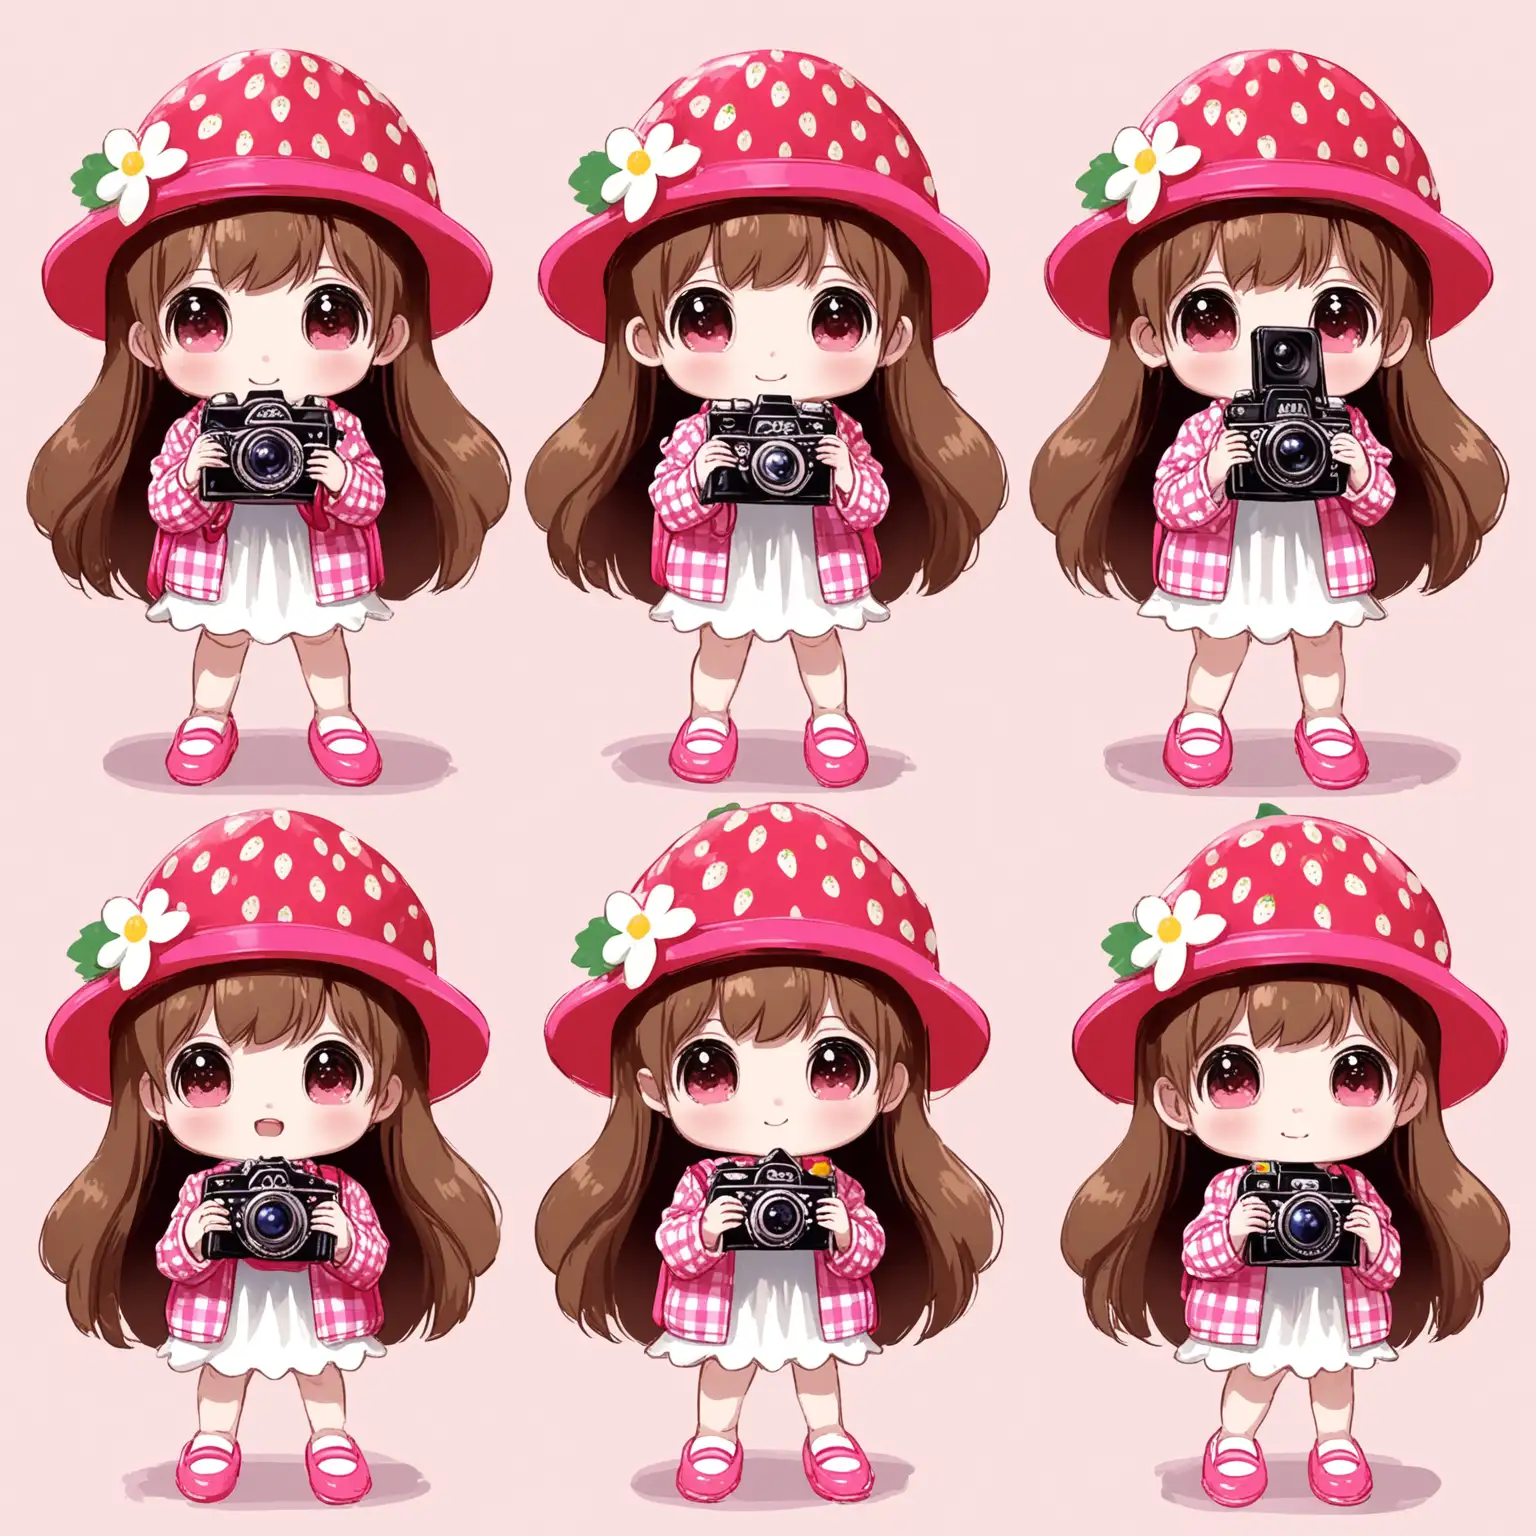 Q version small person three views, character wearing bright red strawberry theme hat (with small white flowers), brown long hair, holding a camera, wearing bright pink checkered jacket, white dress, carrying a pink small bag and wearing bright pink shoes. Background is pink.